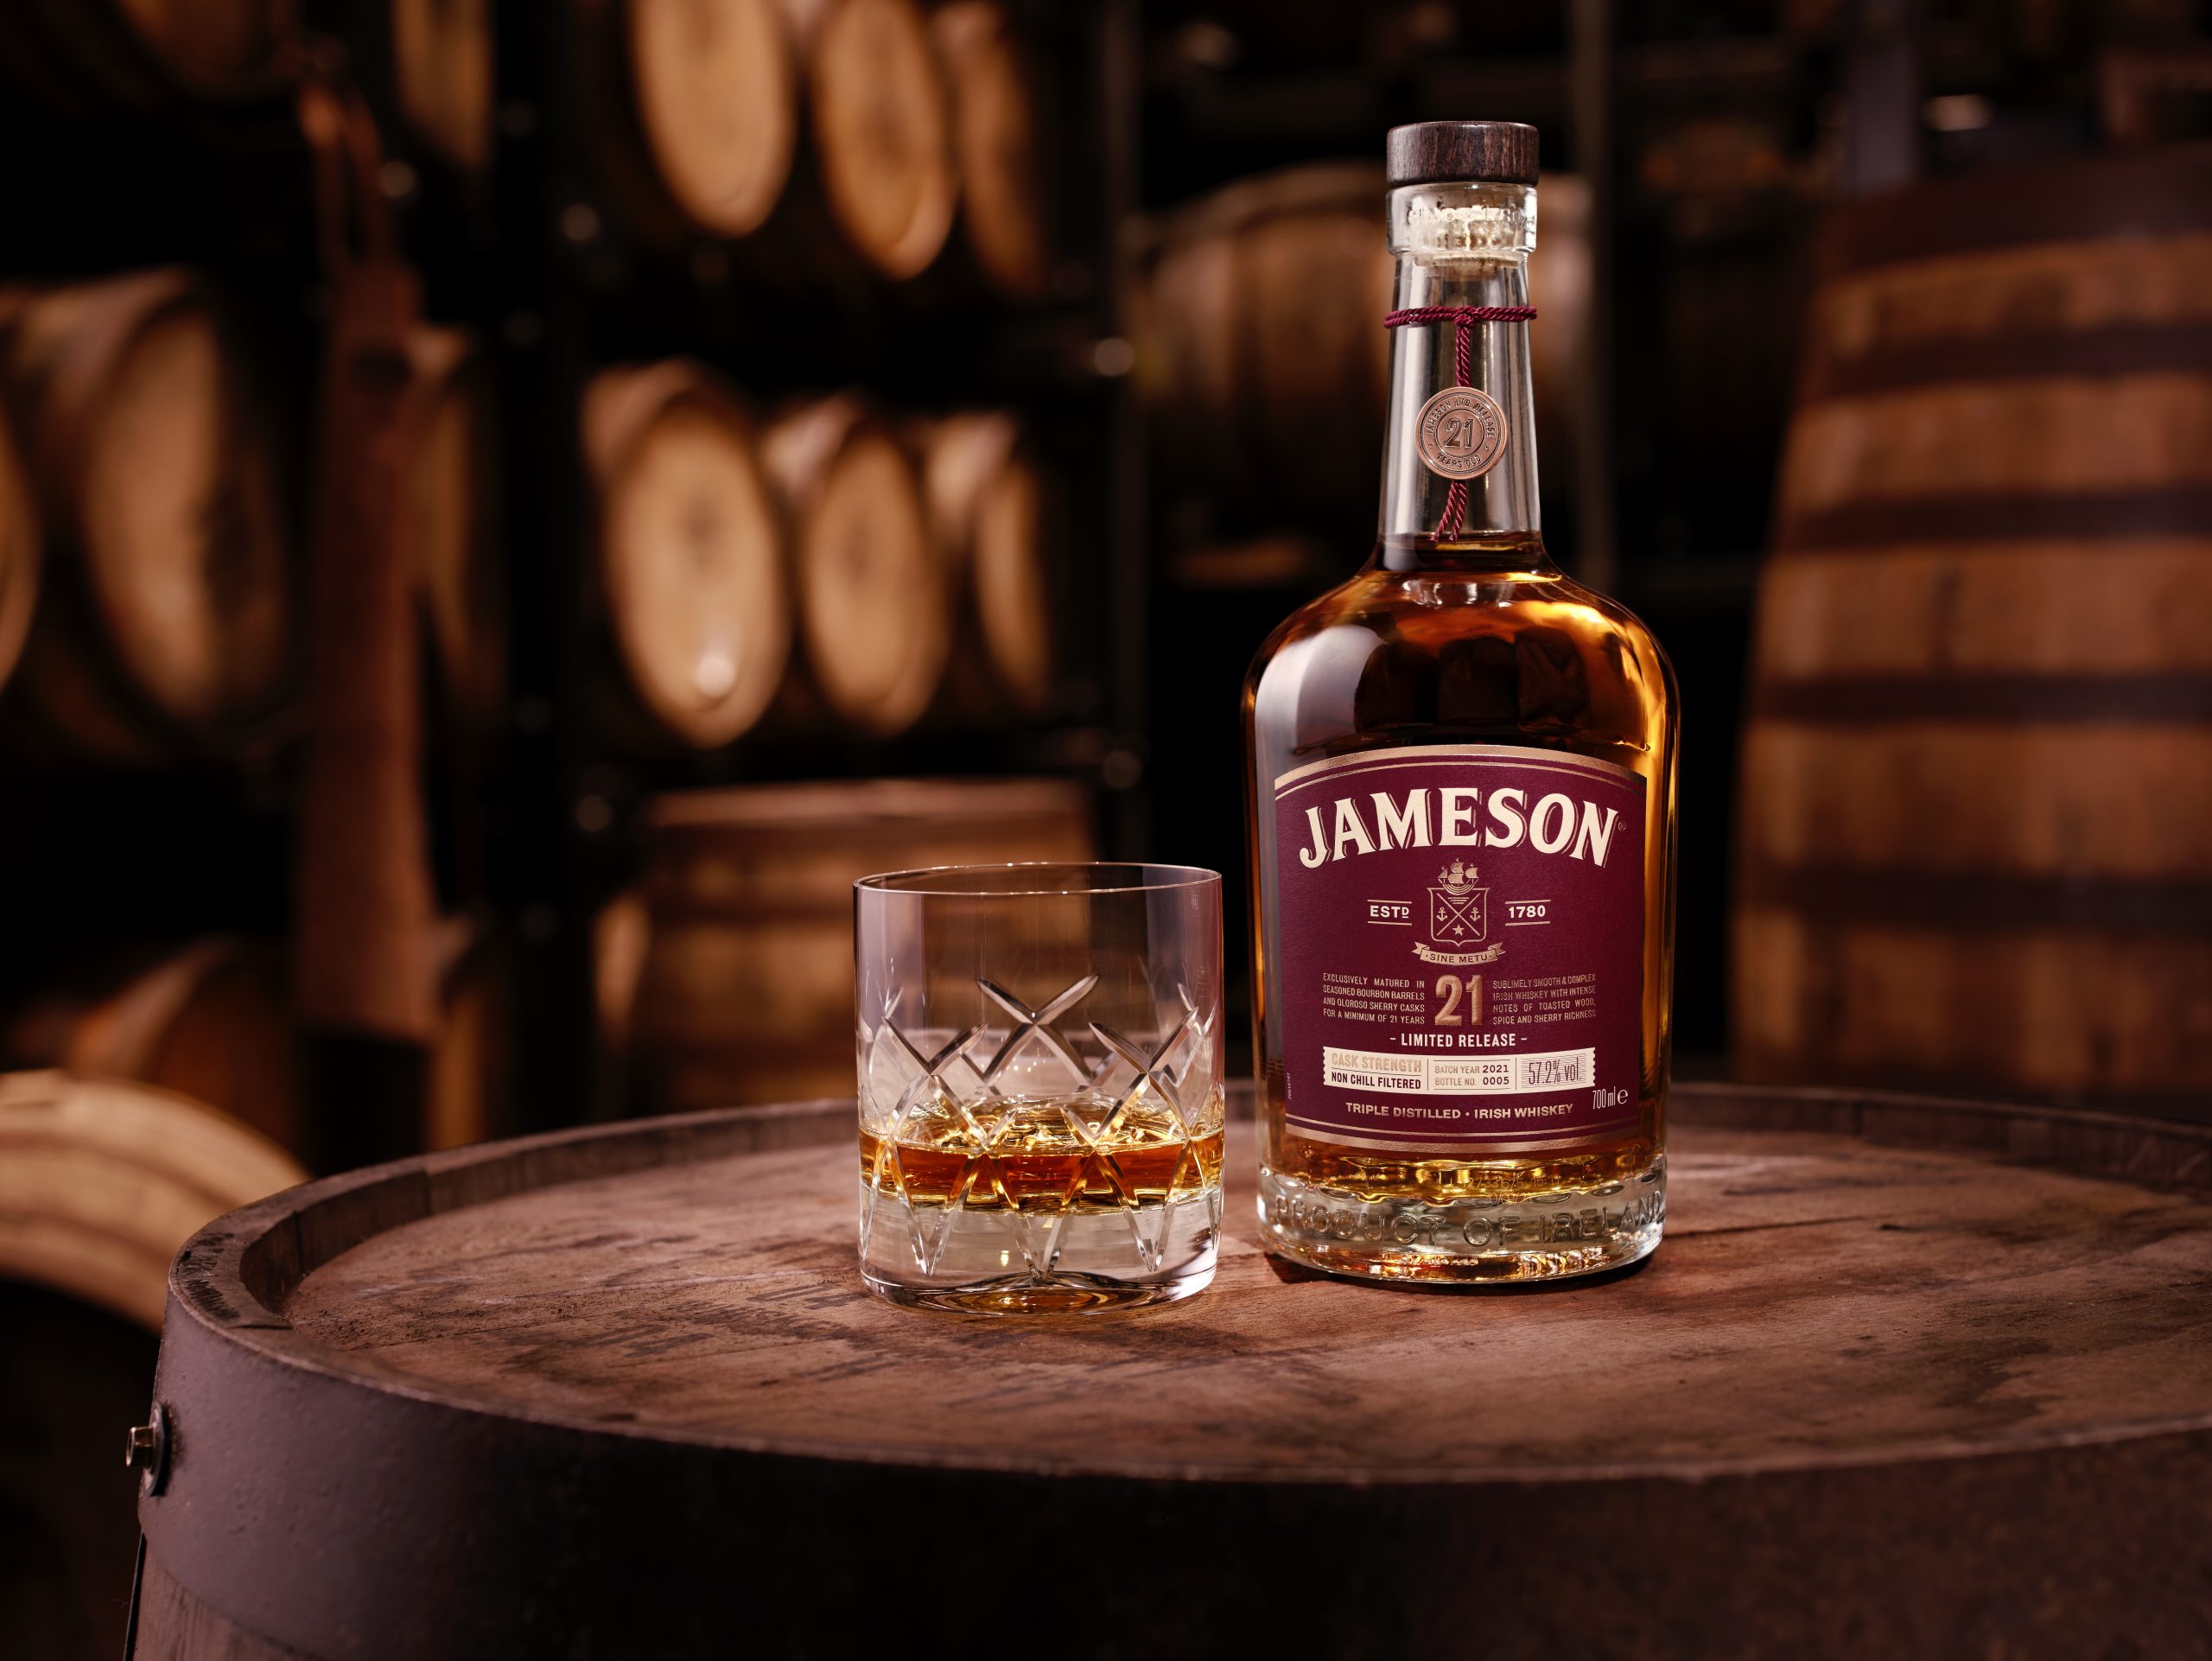 Limited edition Jameson 21 YO whiskey set to join family